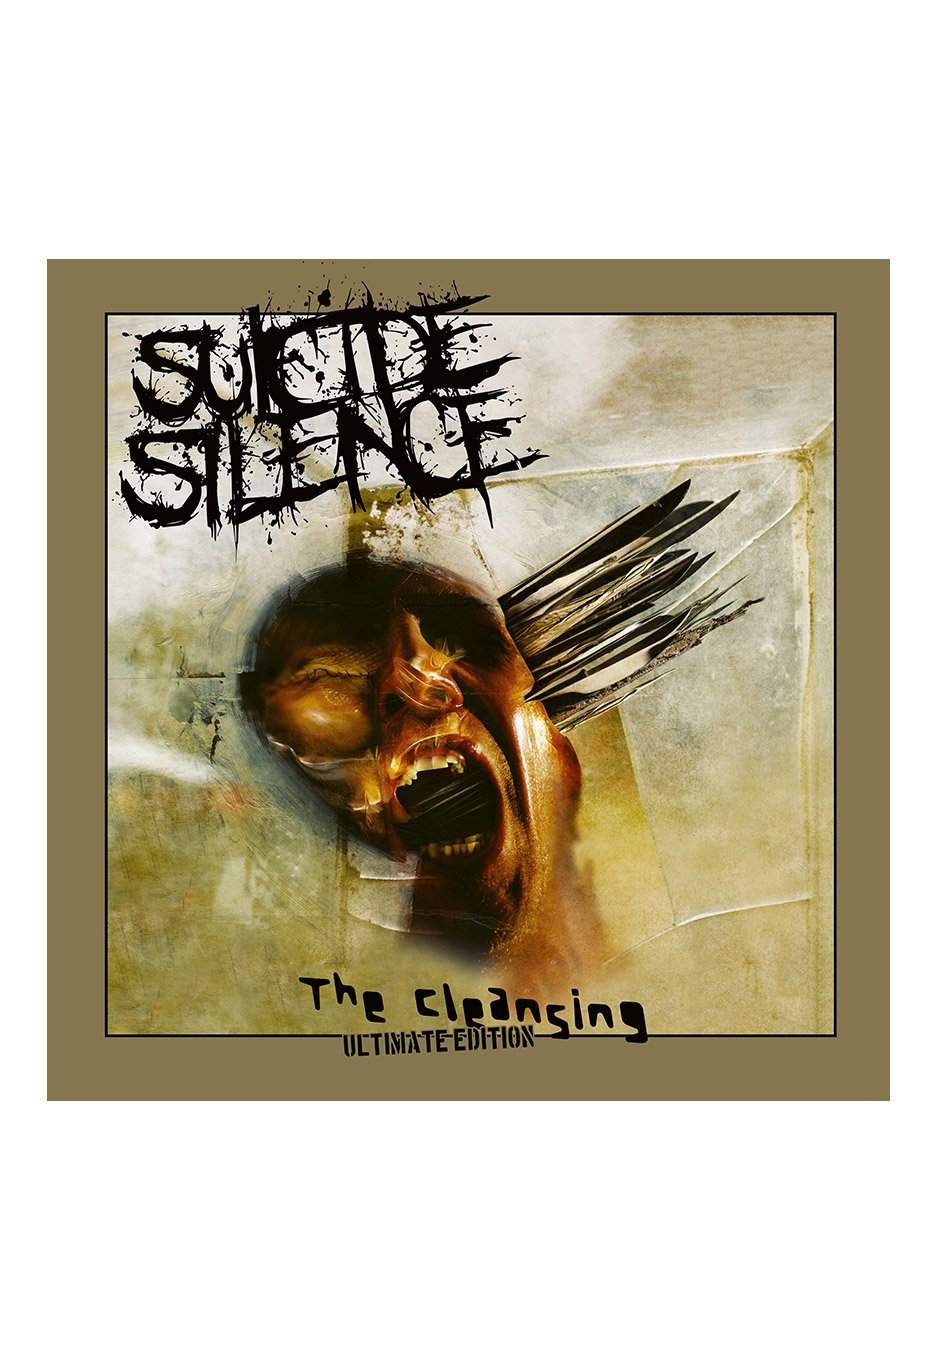 Suicide Silence - The Cleansing (Ultimate Edition) Ltd - Digipak 2 CD